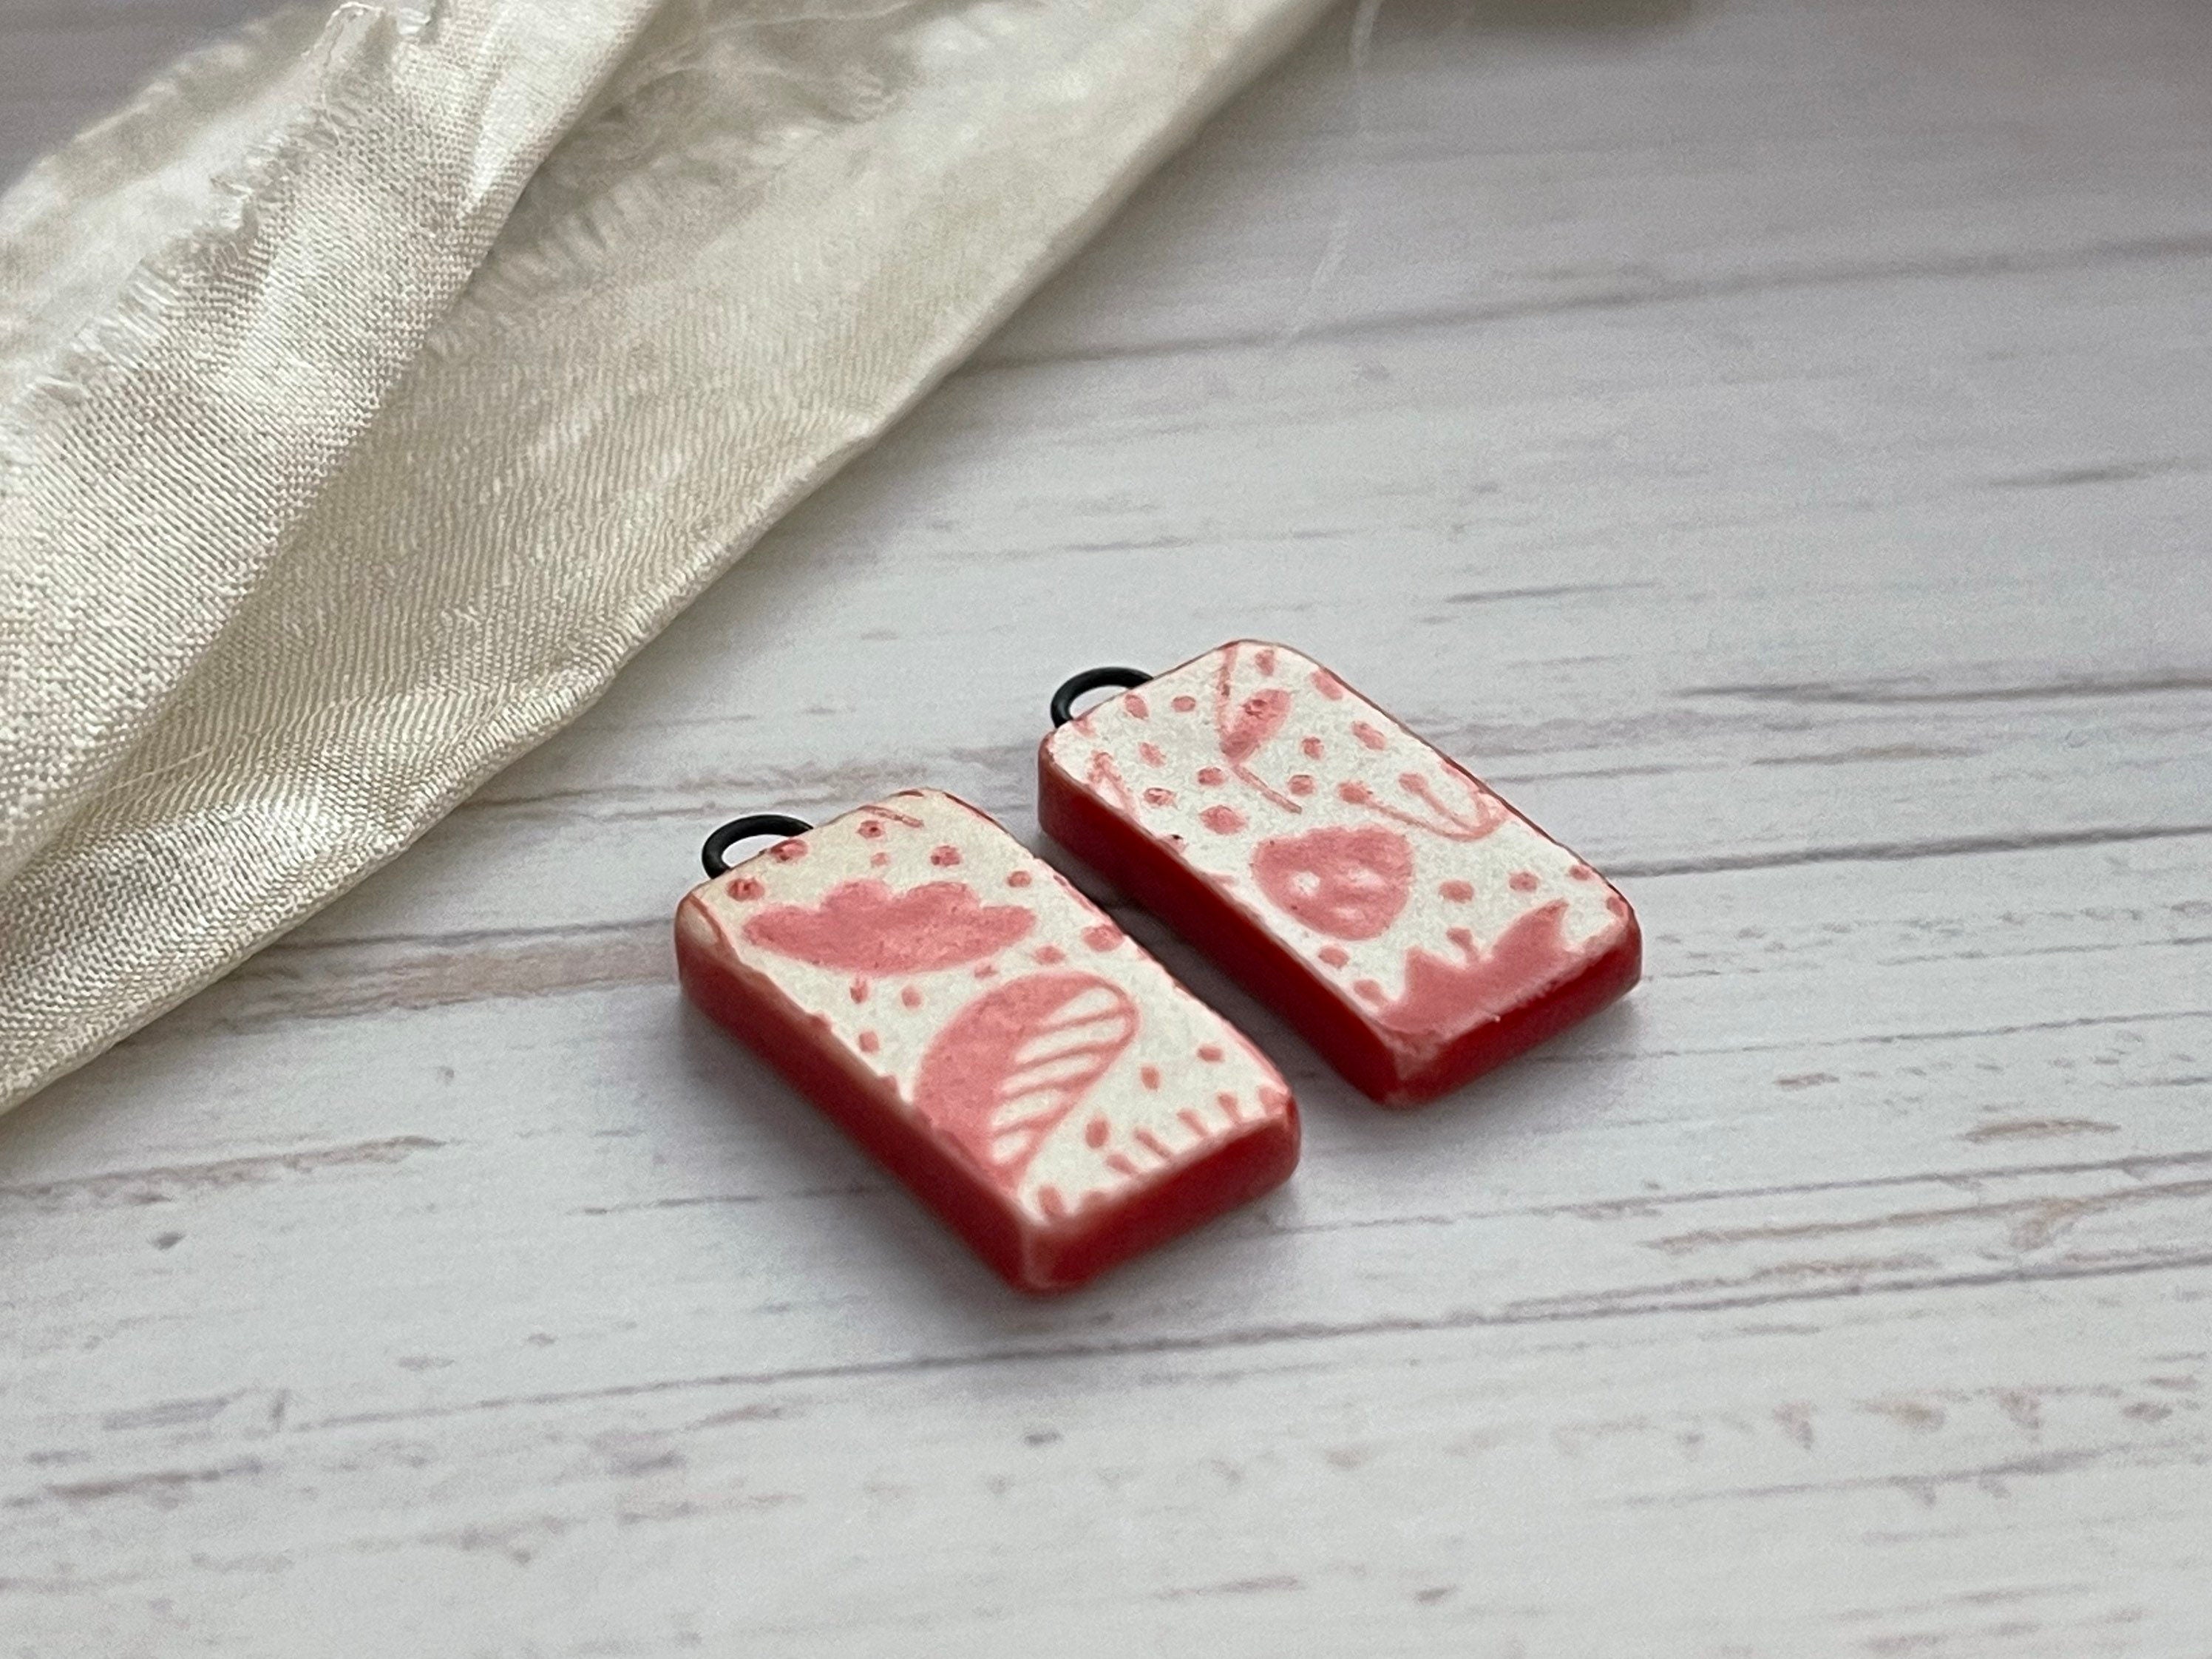 Red rectangle, Earring Bead Pair, Porcelain Charms, Ceramic Charms, Jewelry Making Components, Beading Handmade, DIY Earrings, DIY Beads